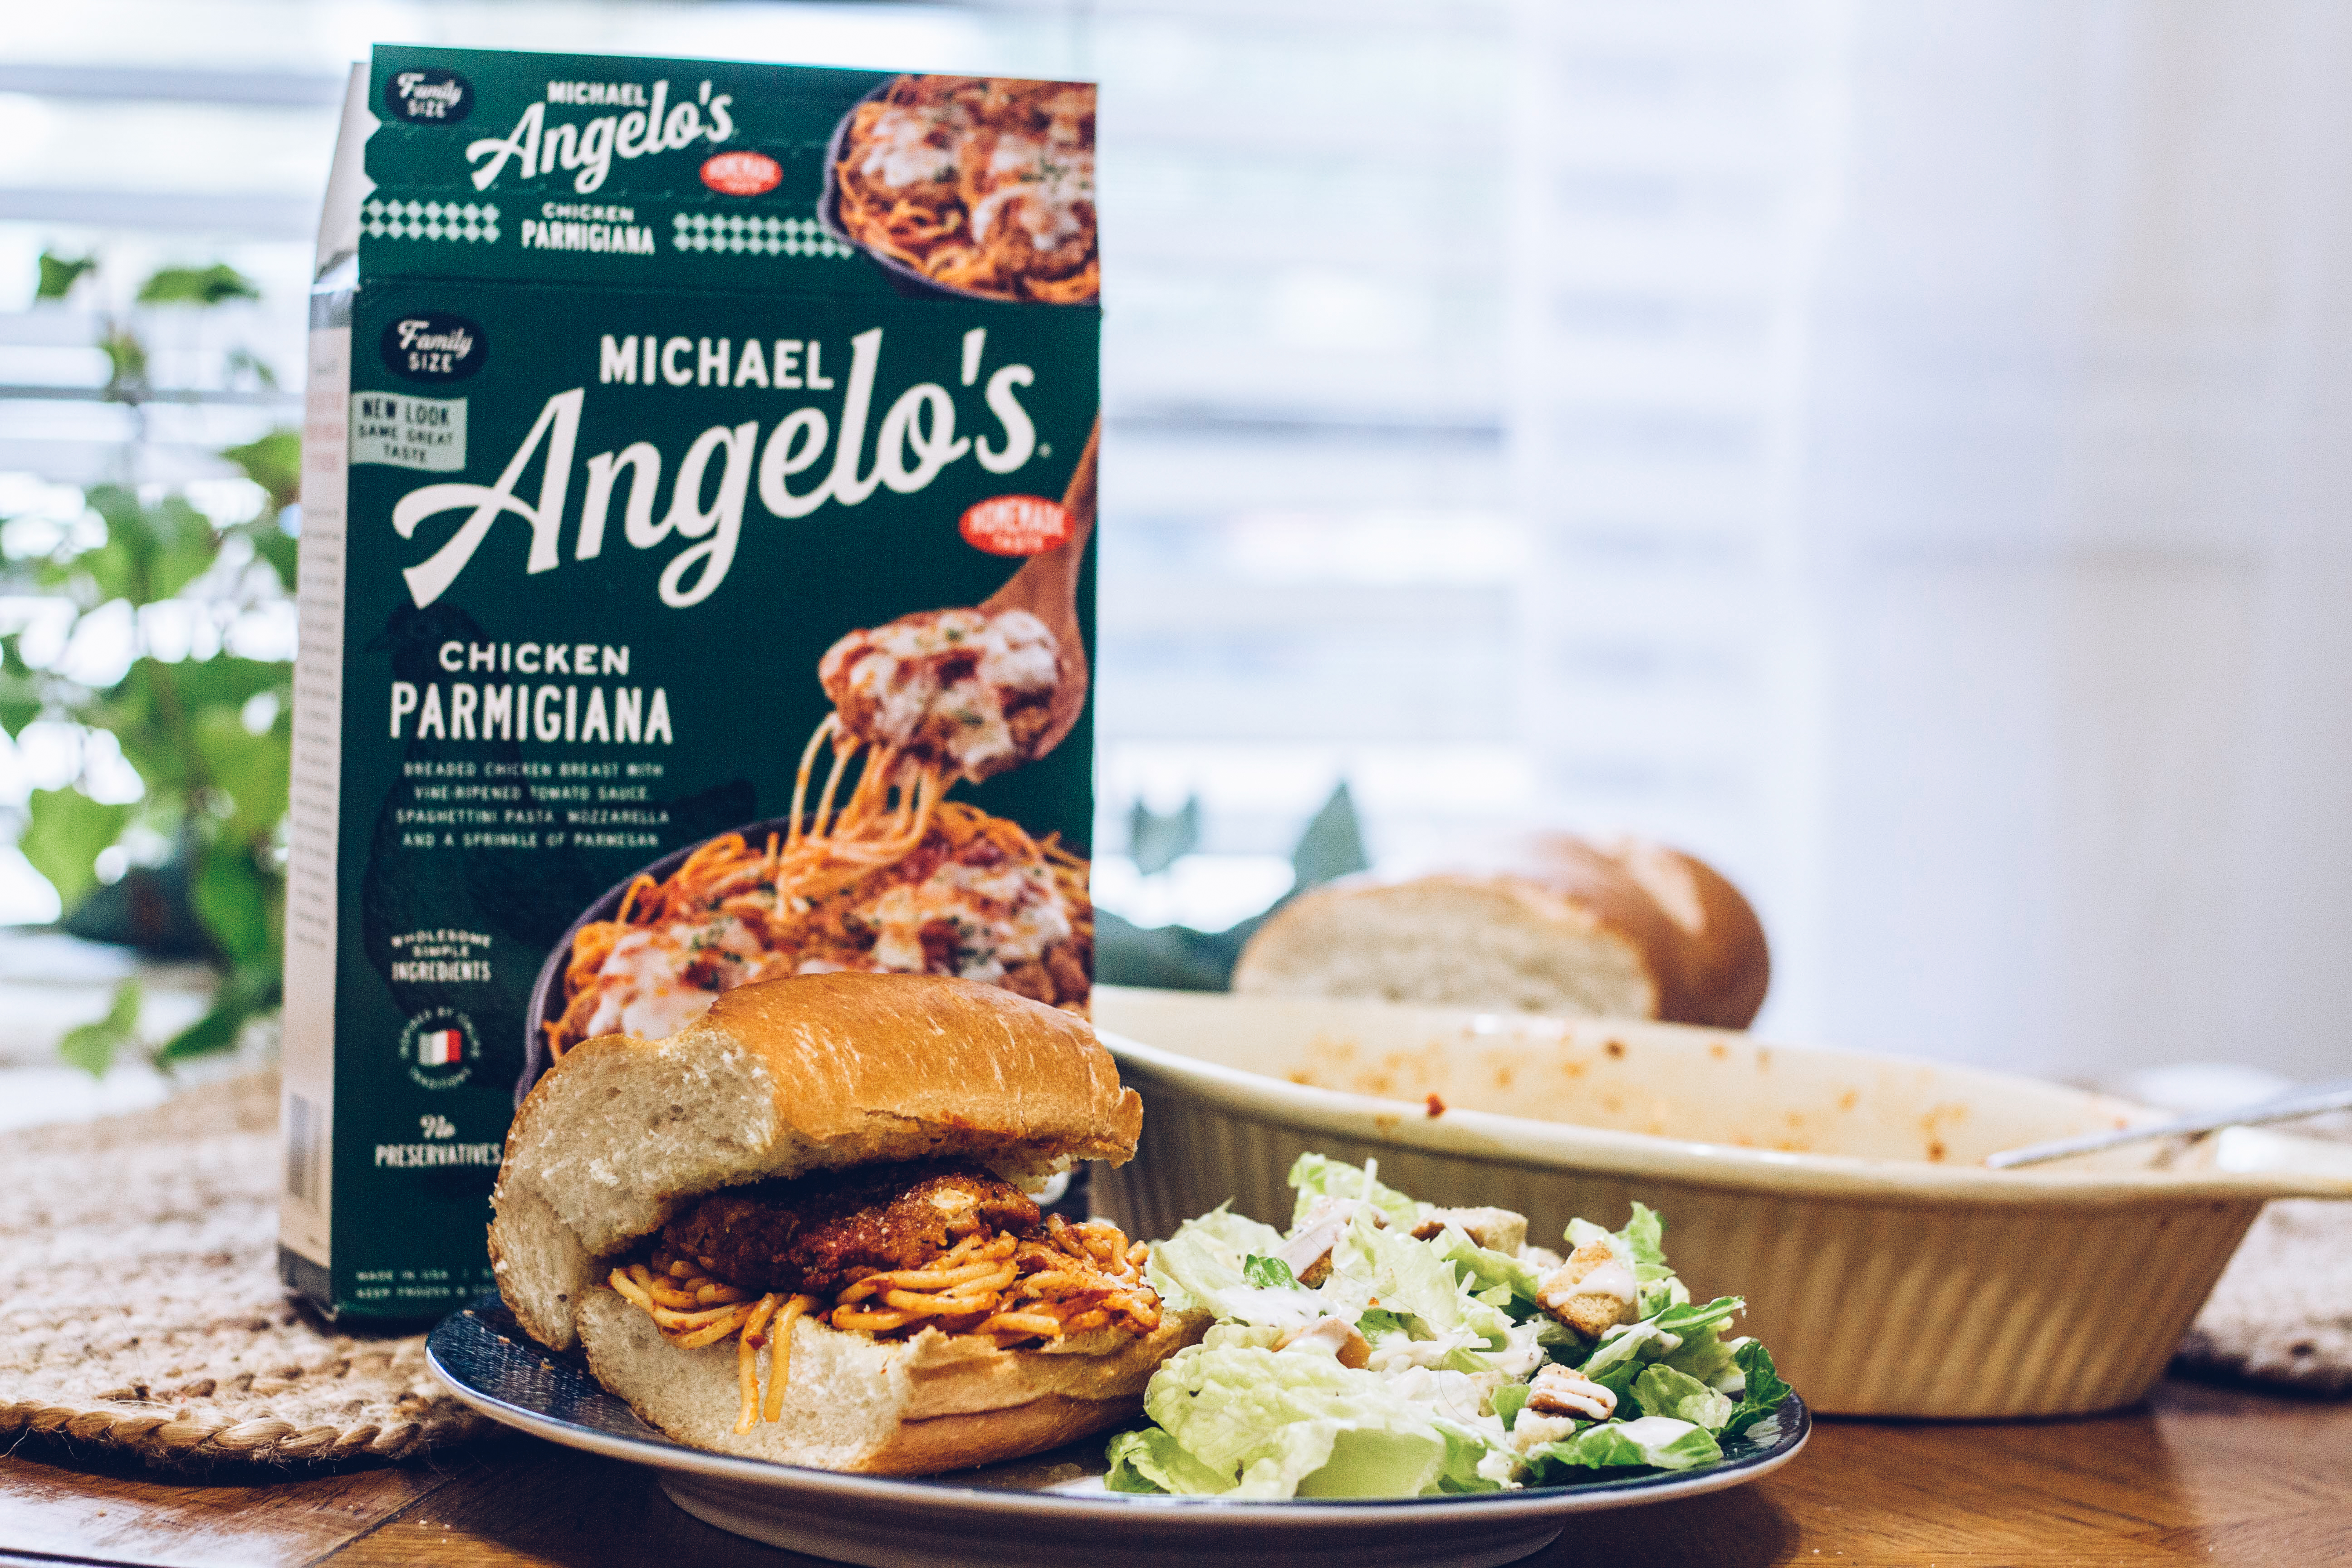 Easy Chicken Parmigiana Sandwiches with Michael Angelos